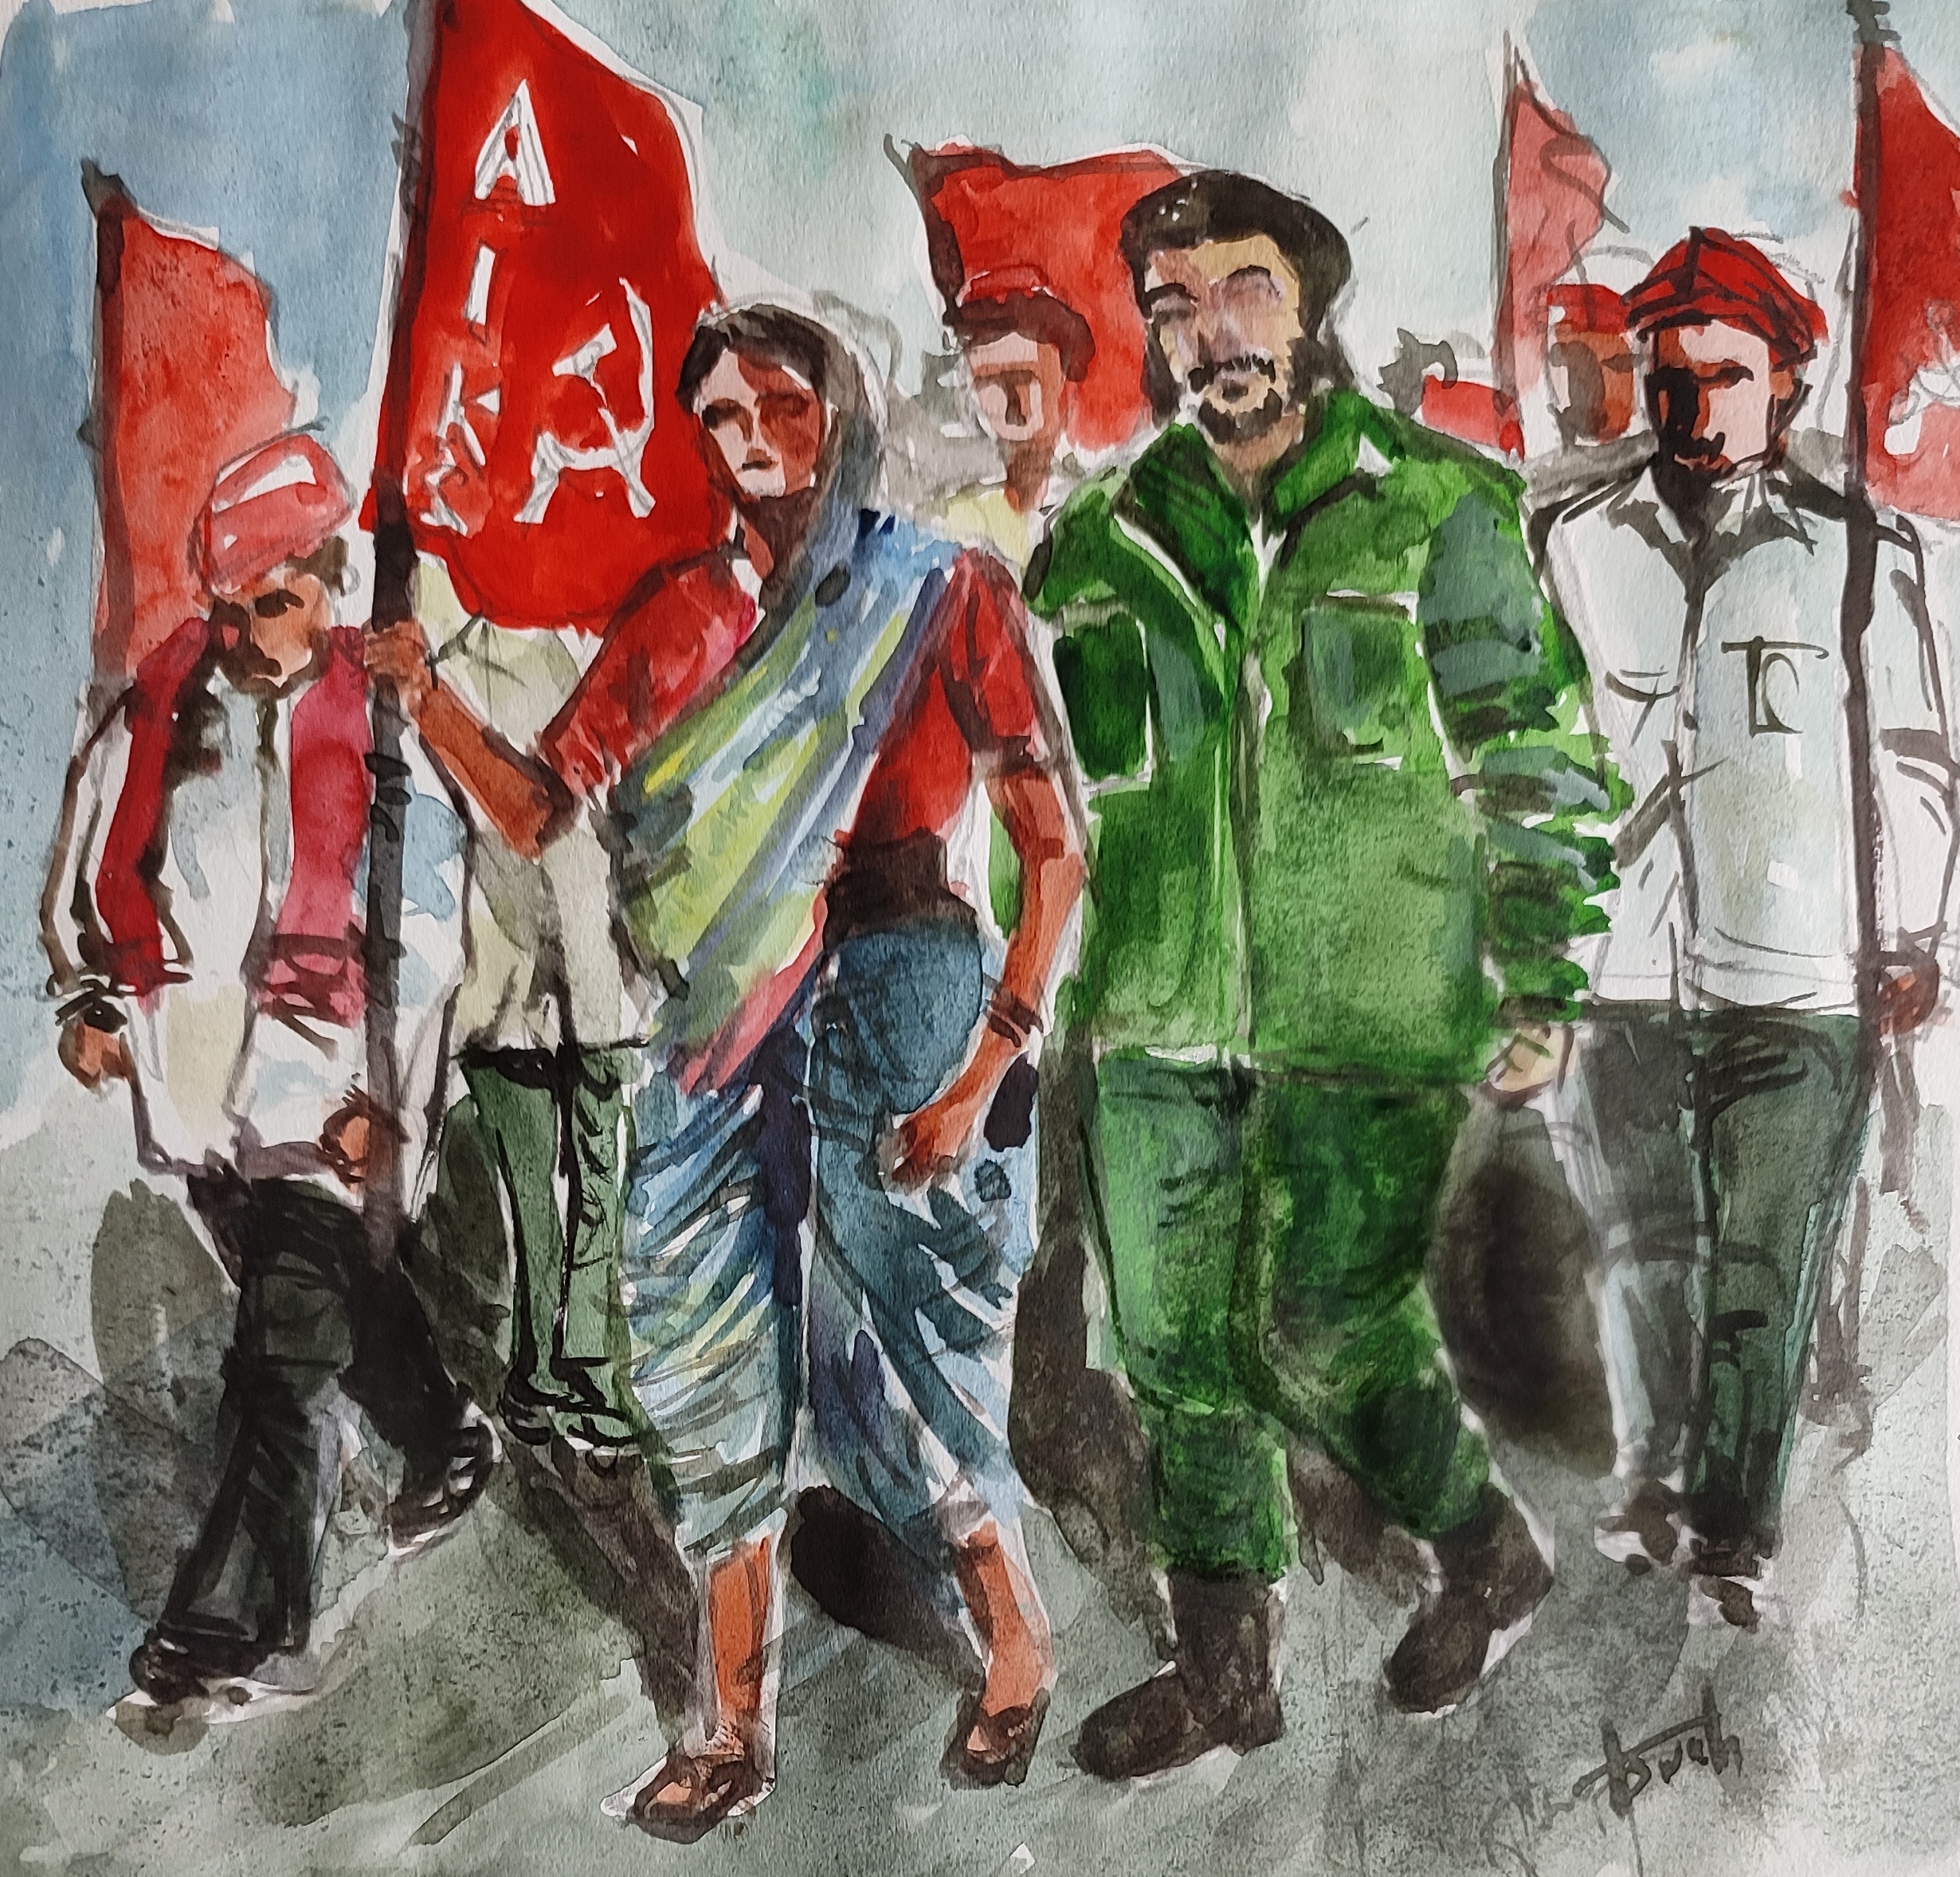 Aswath Madhavan (Young Socialist Artists, India), Marching with the Peasants, 2021.